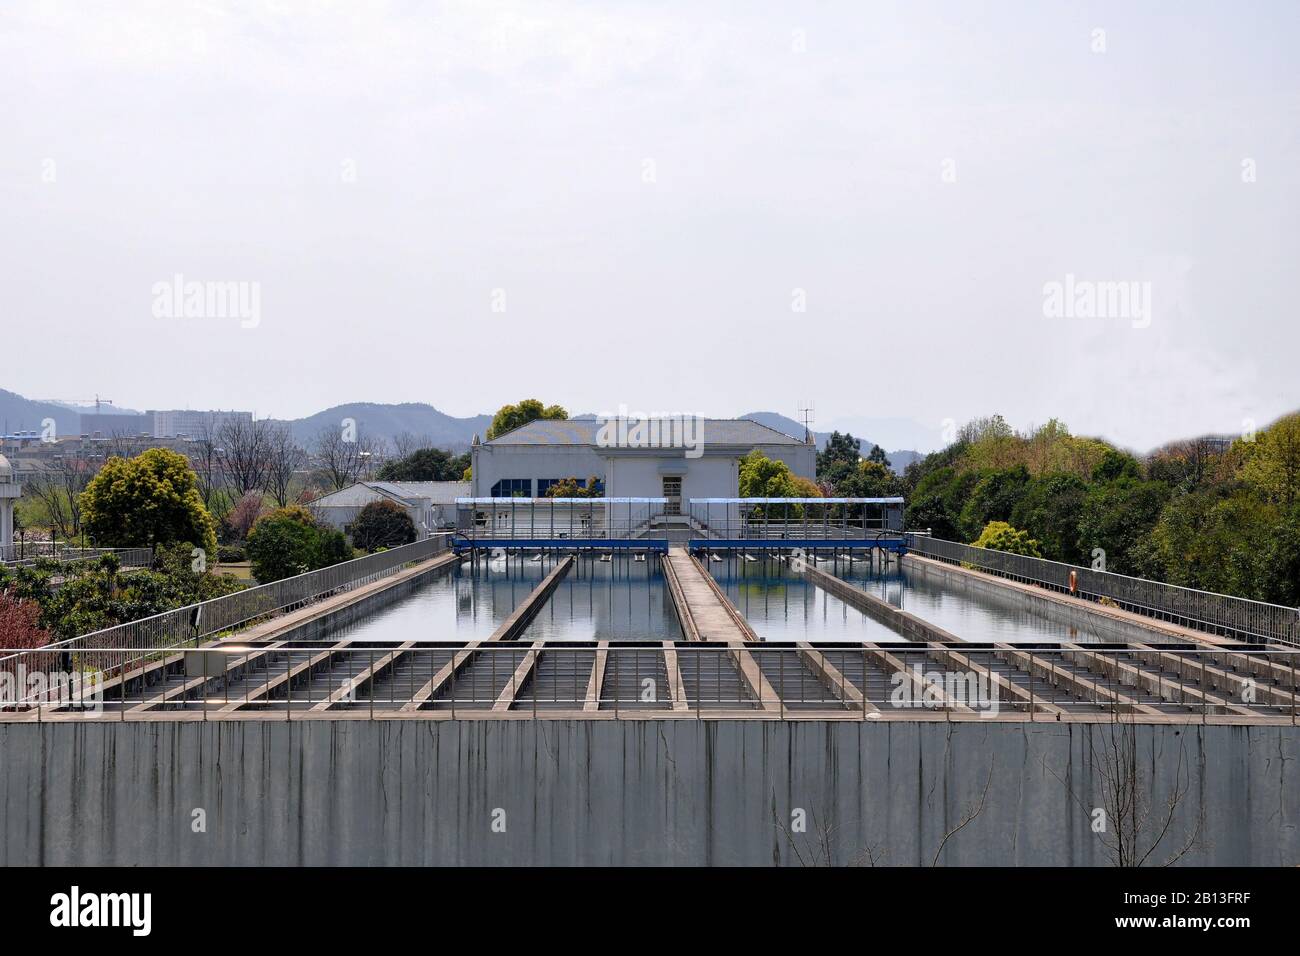 Modern wastewater treatment plant. Tanks for aeration and biological purification of sewage by using active sludge. Stock Photo